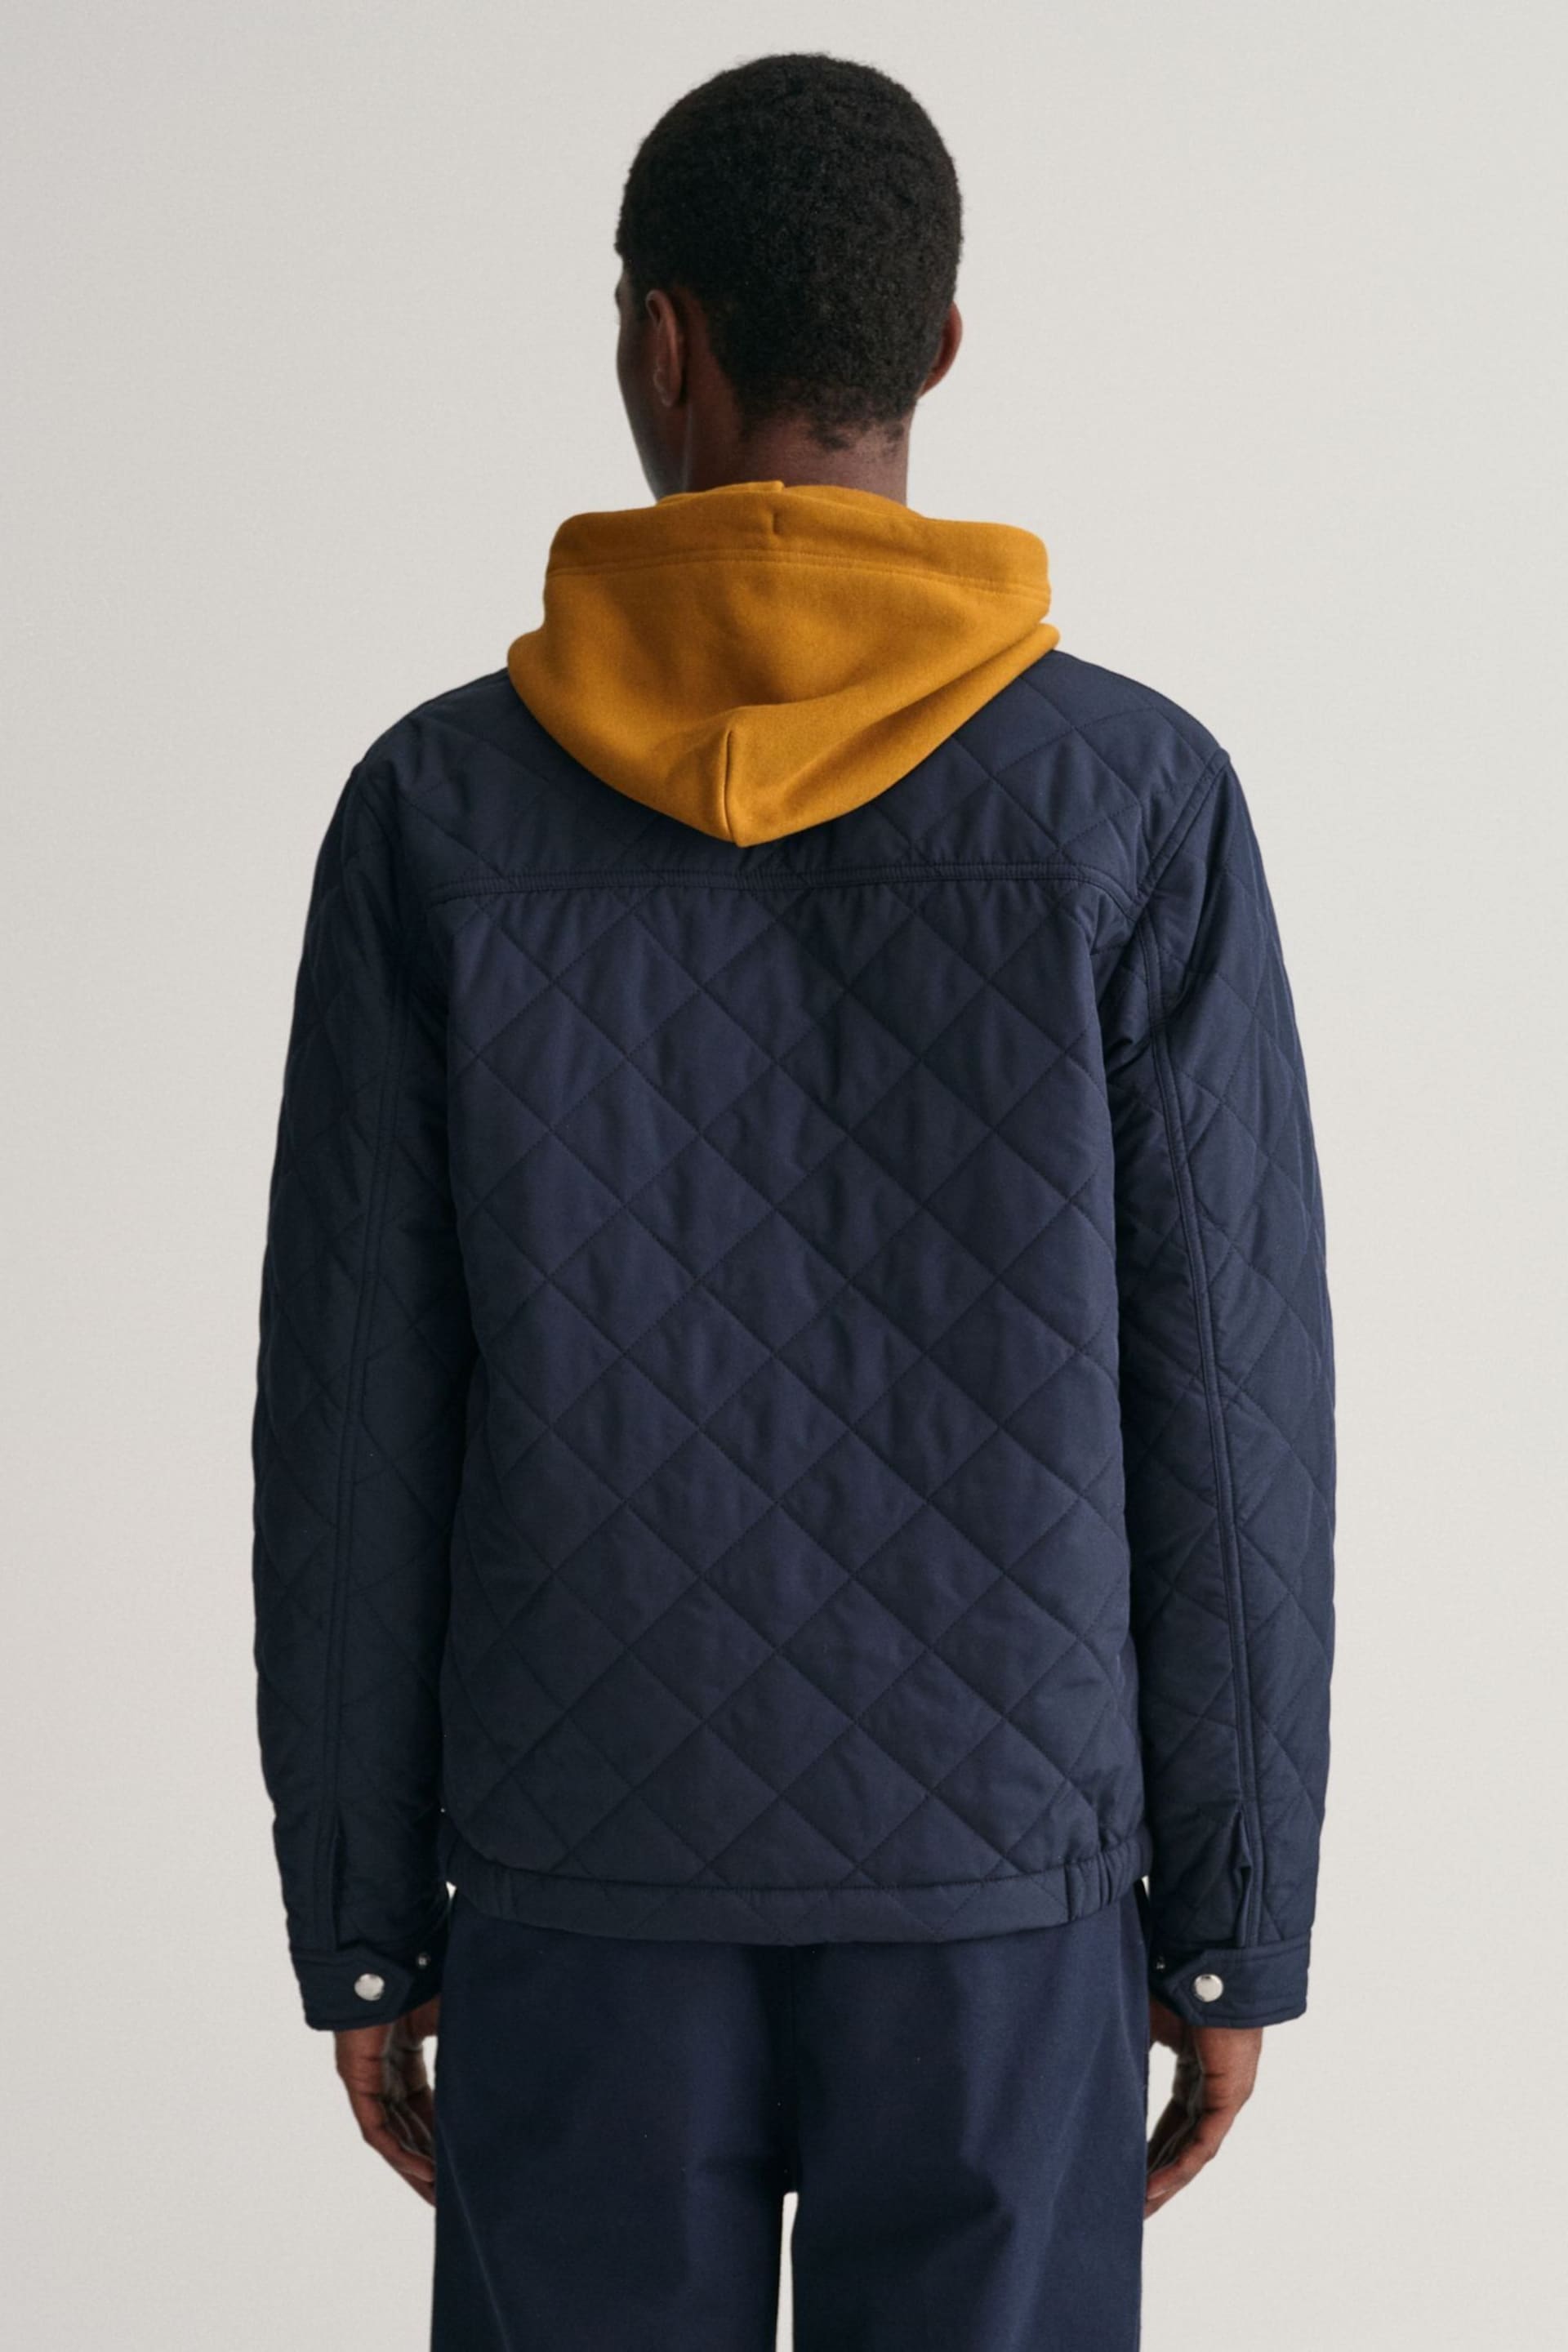 GANT Blue Quilted Windcheater Jacket - Image 2 of 7